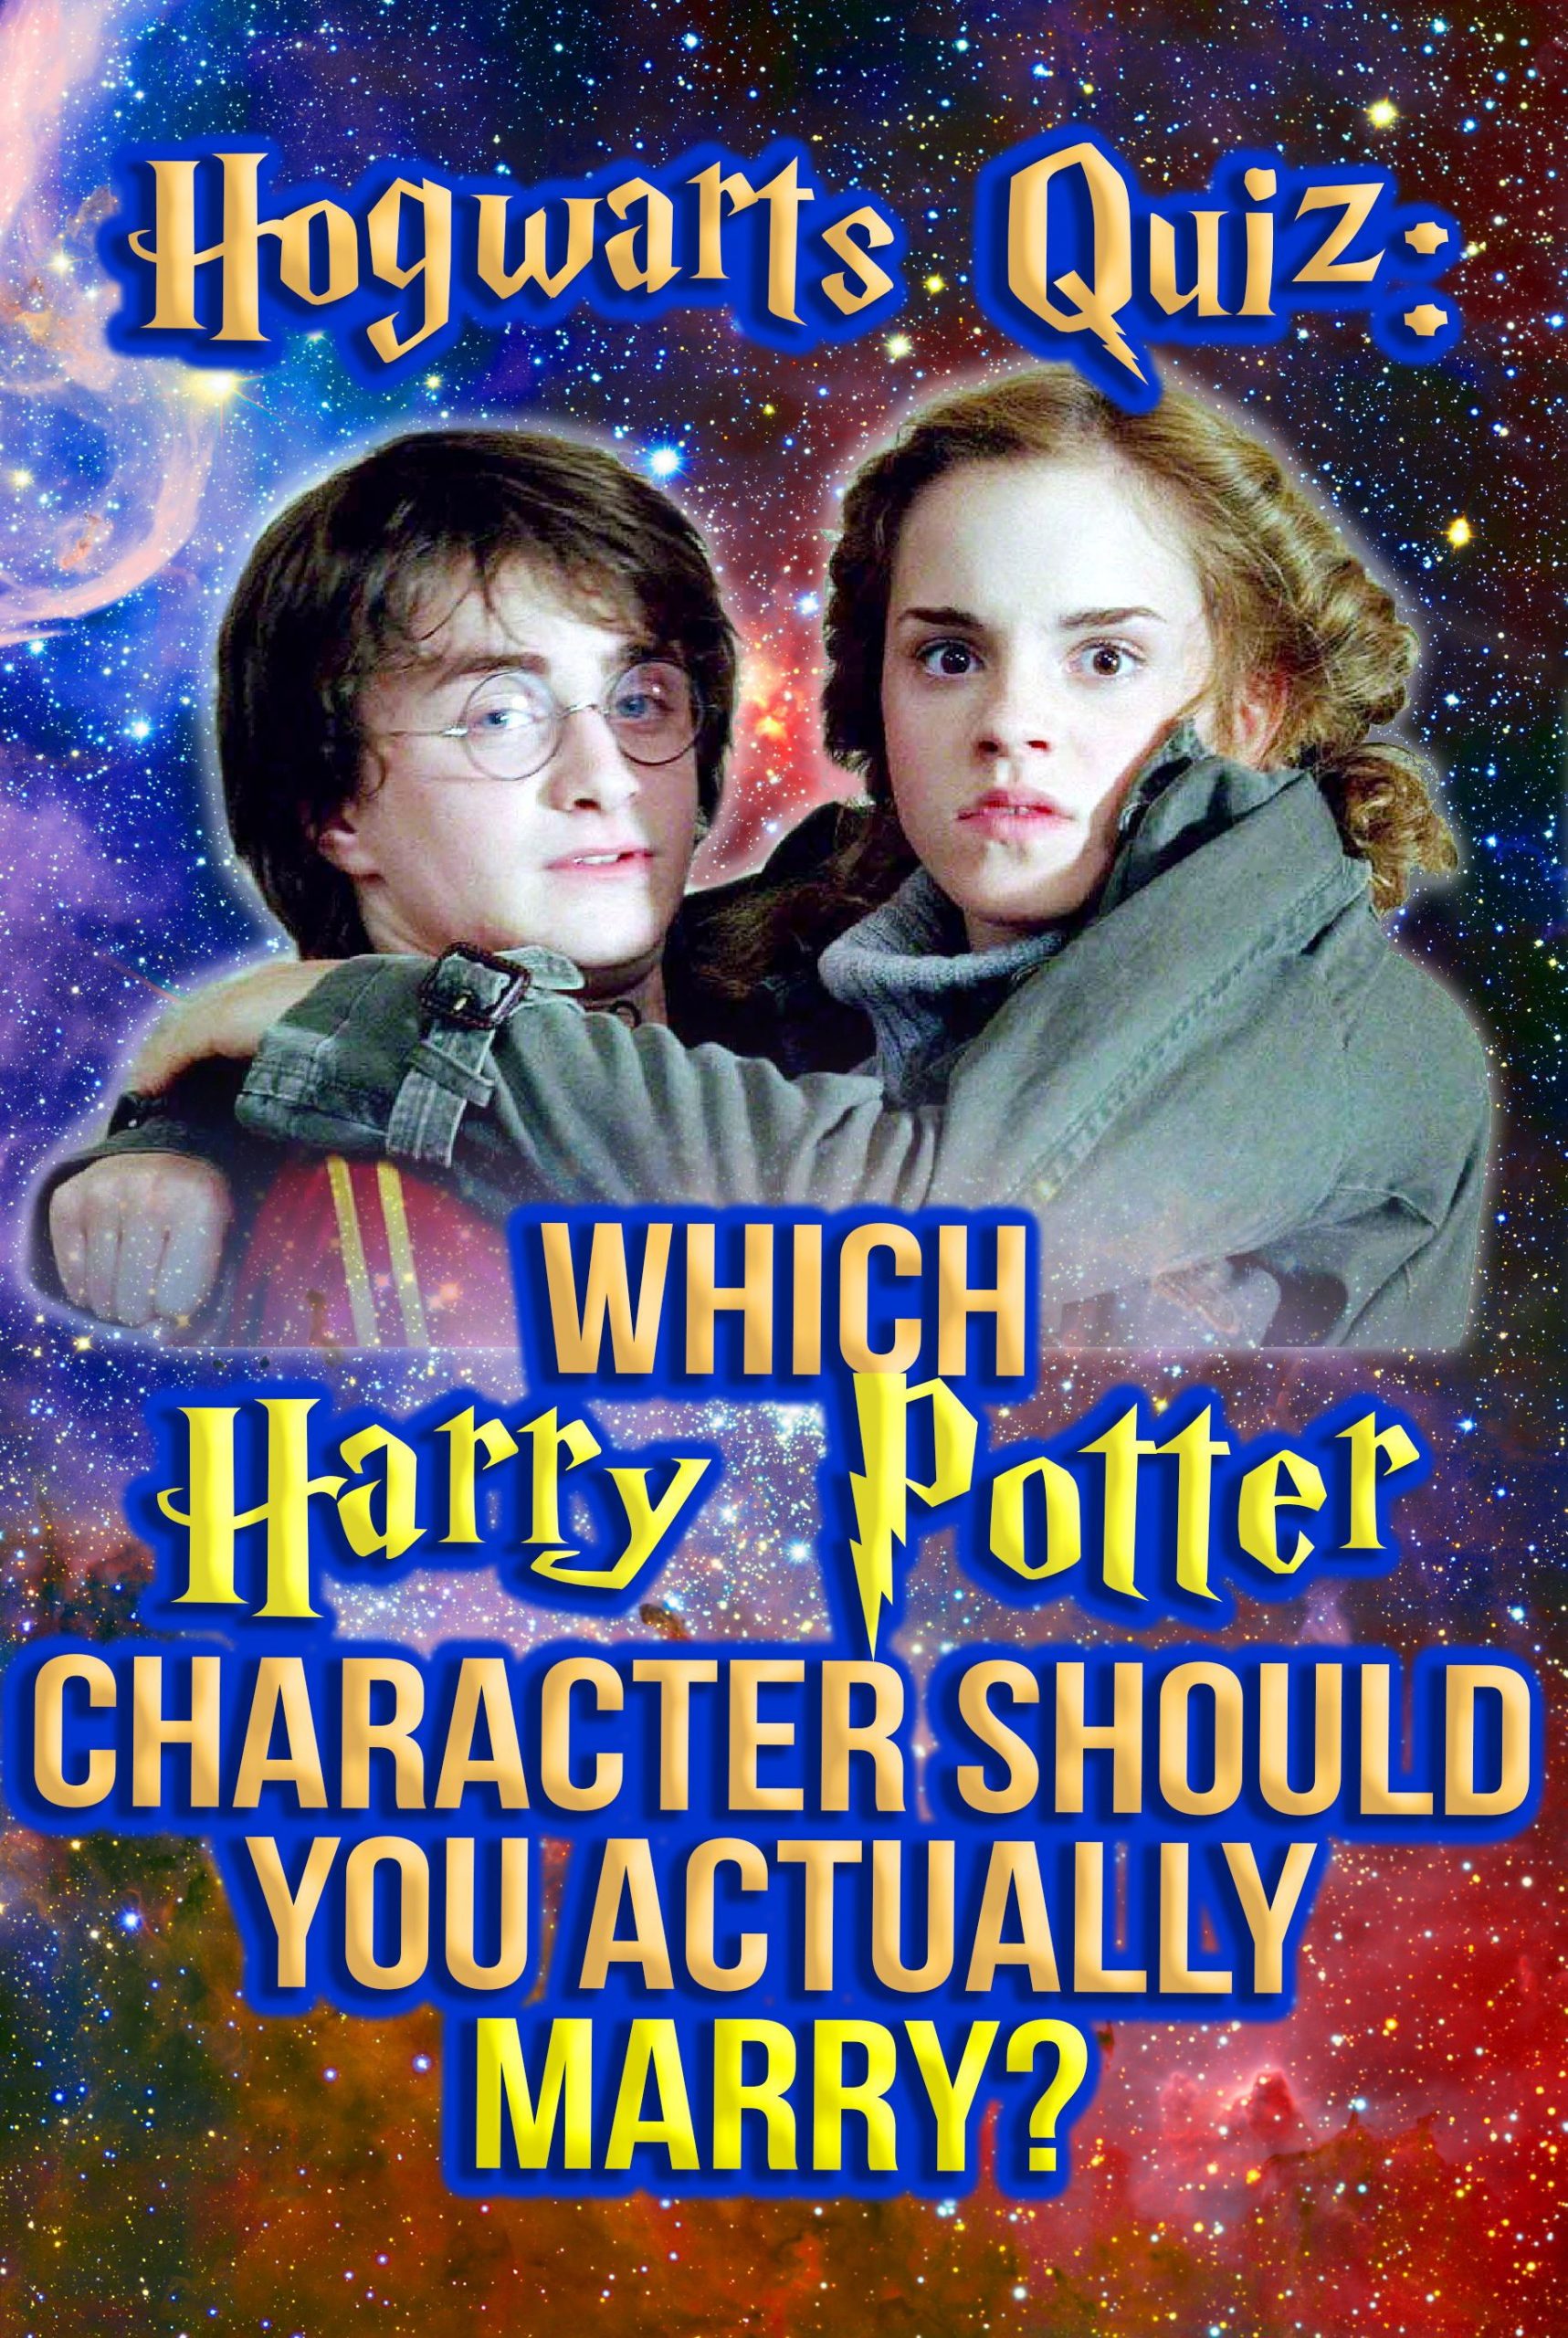 Hogwarts Quiz: Which Harry Potter Character Should You Actually Marry ...